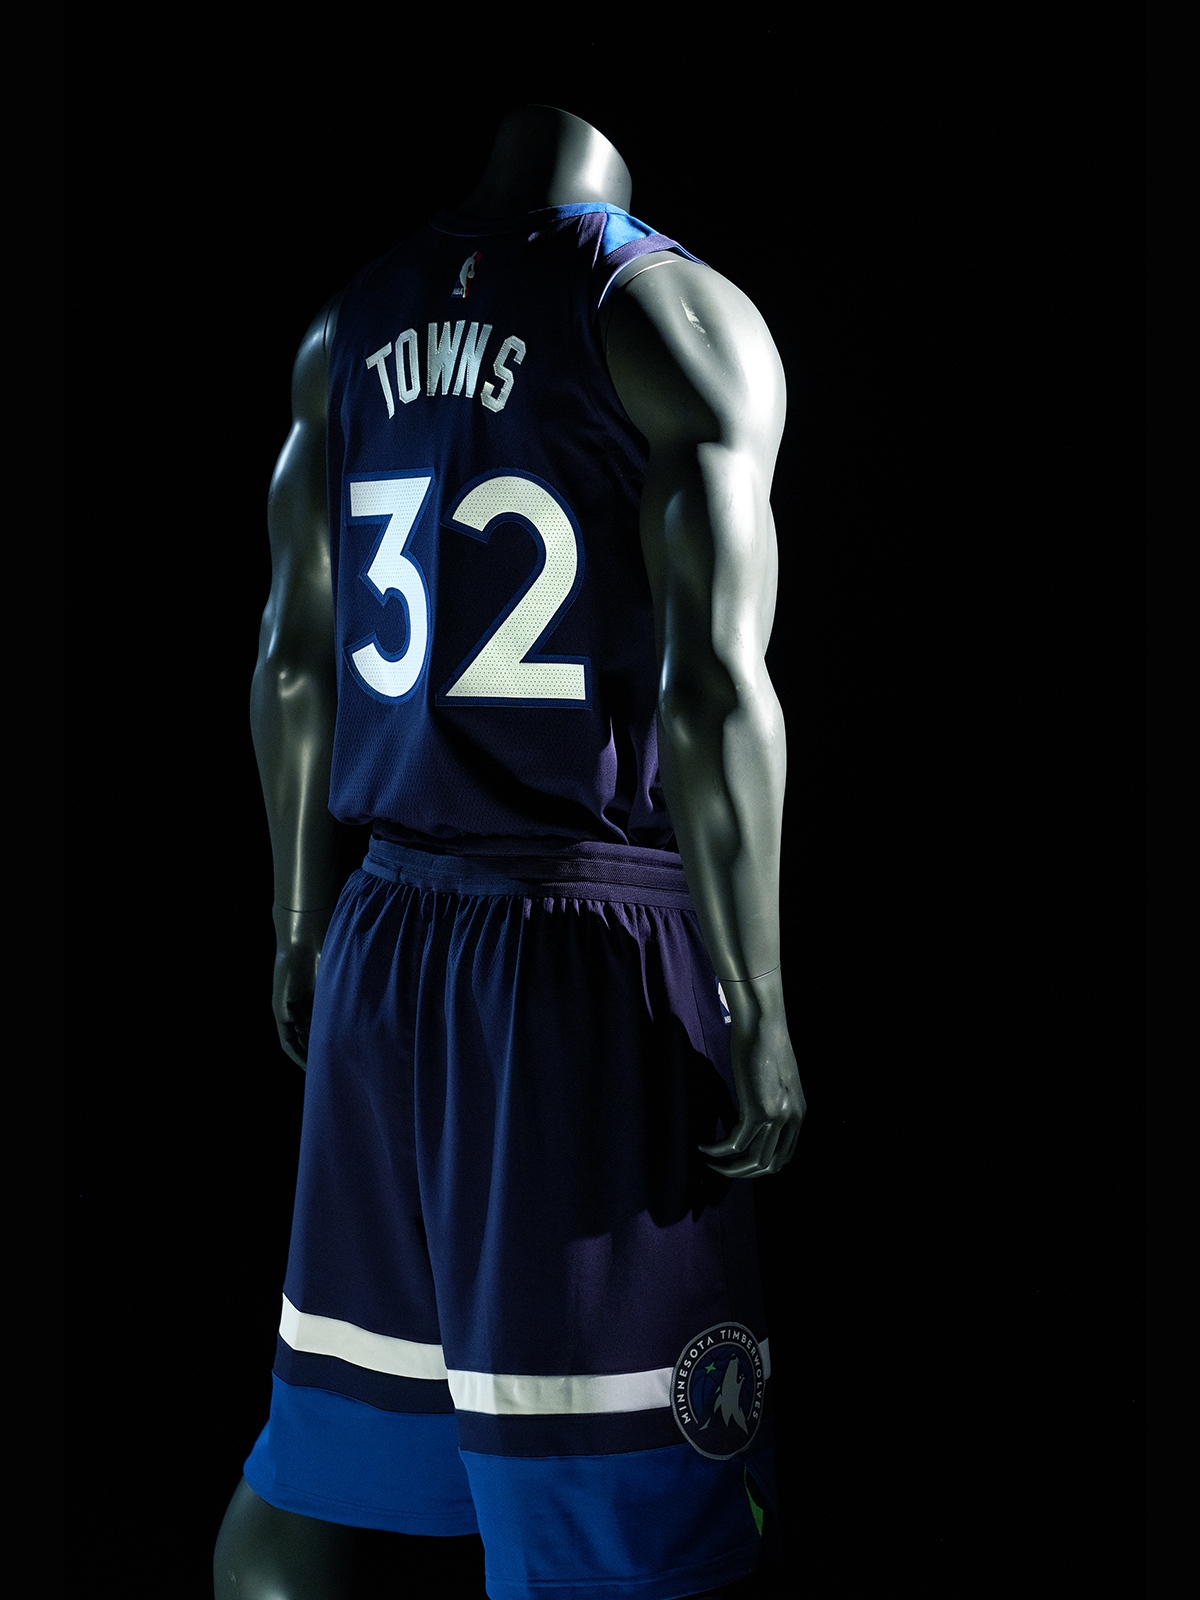 timberwolves jersey up and down